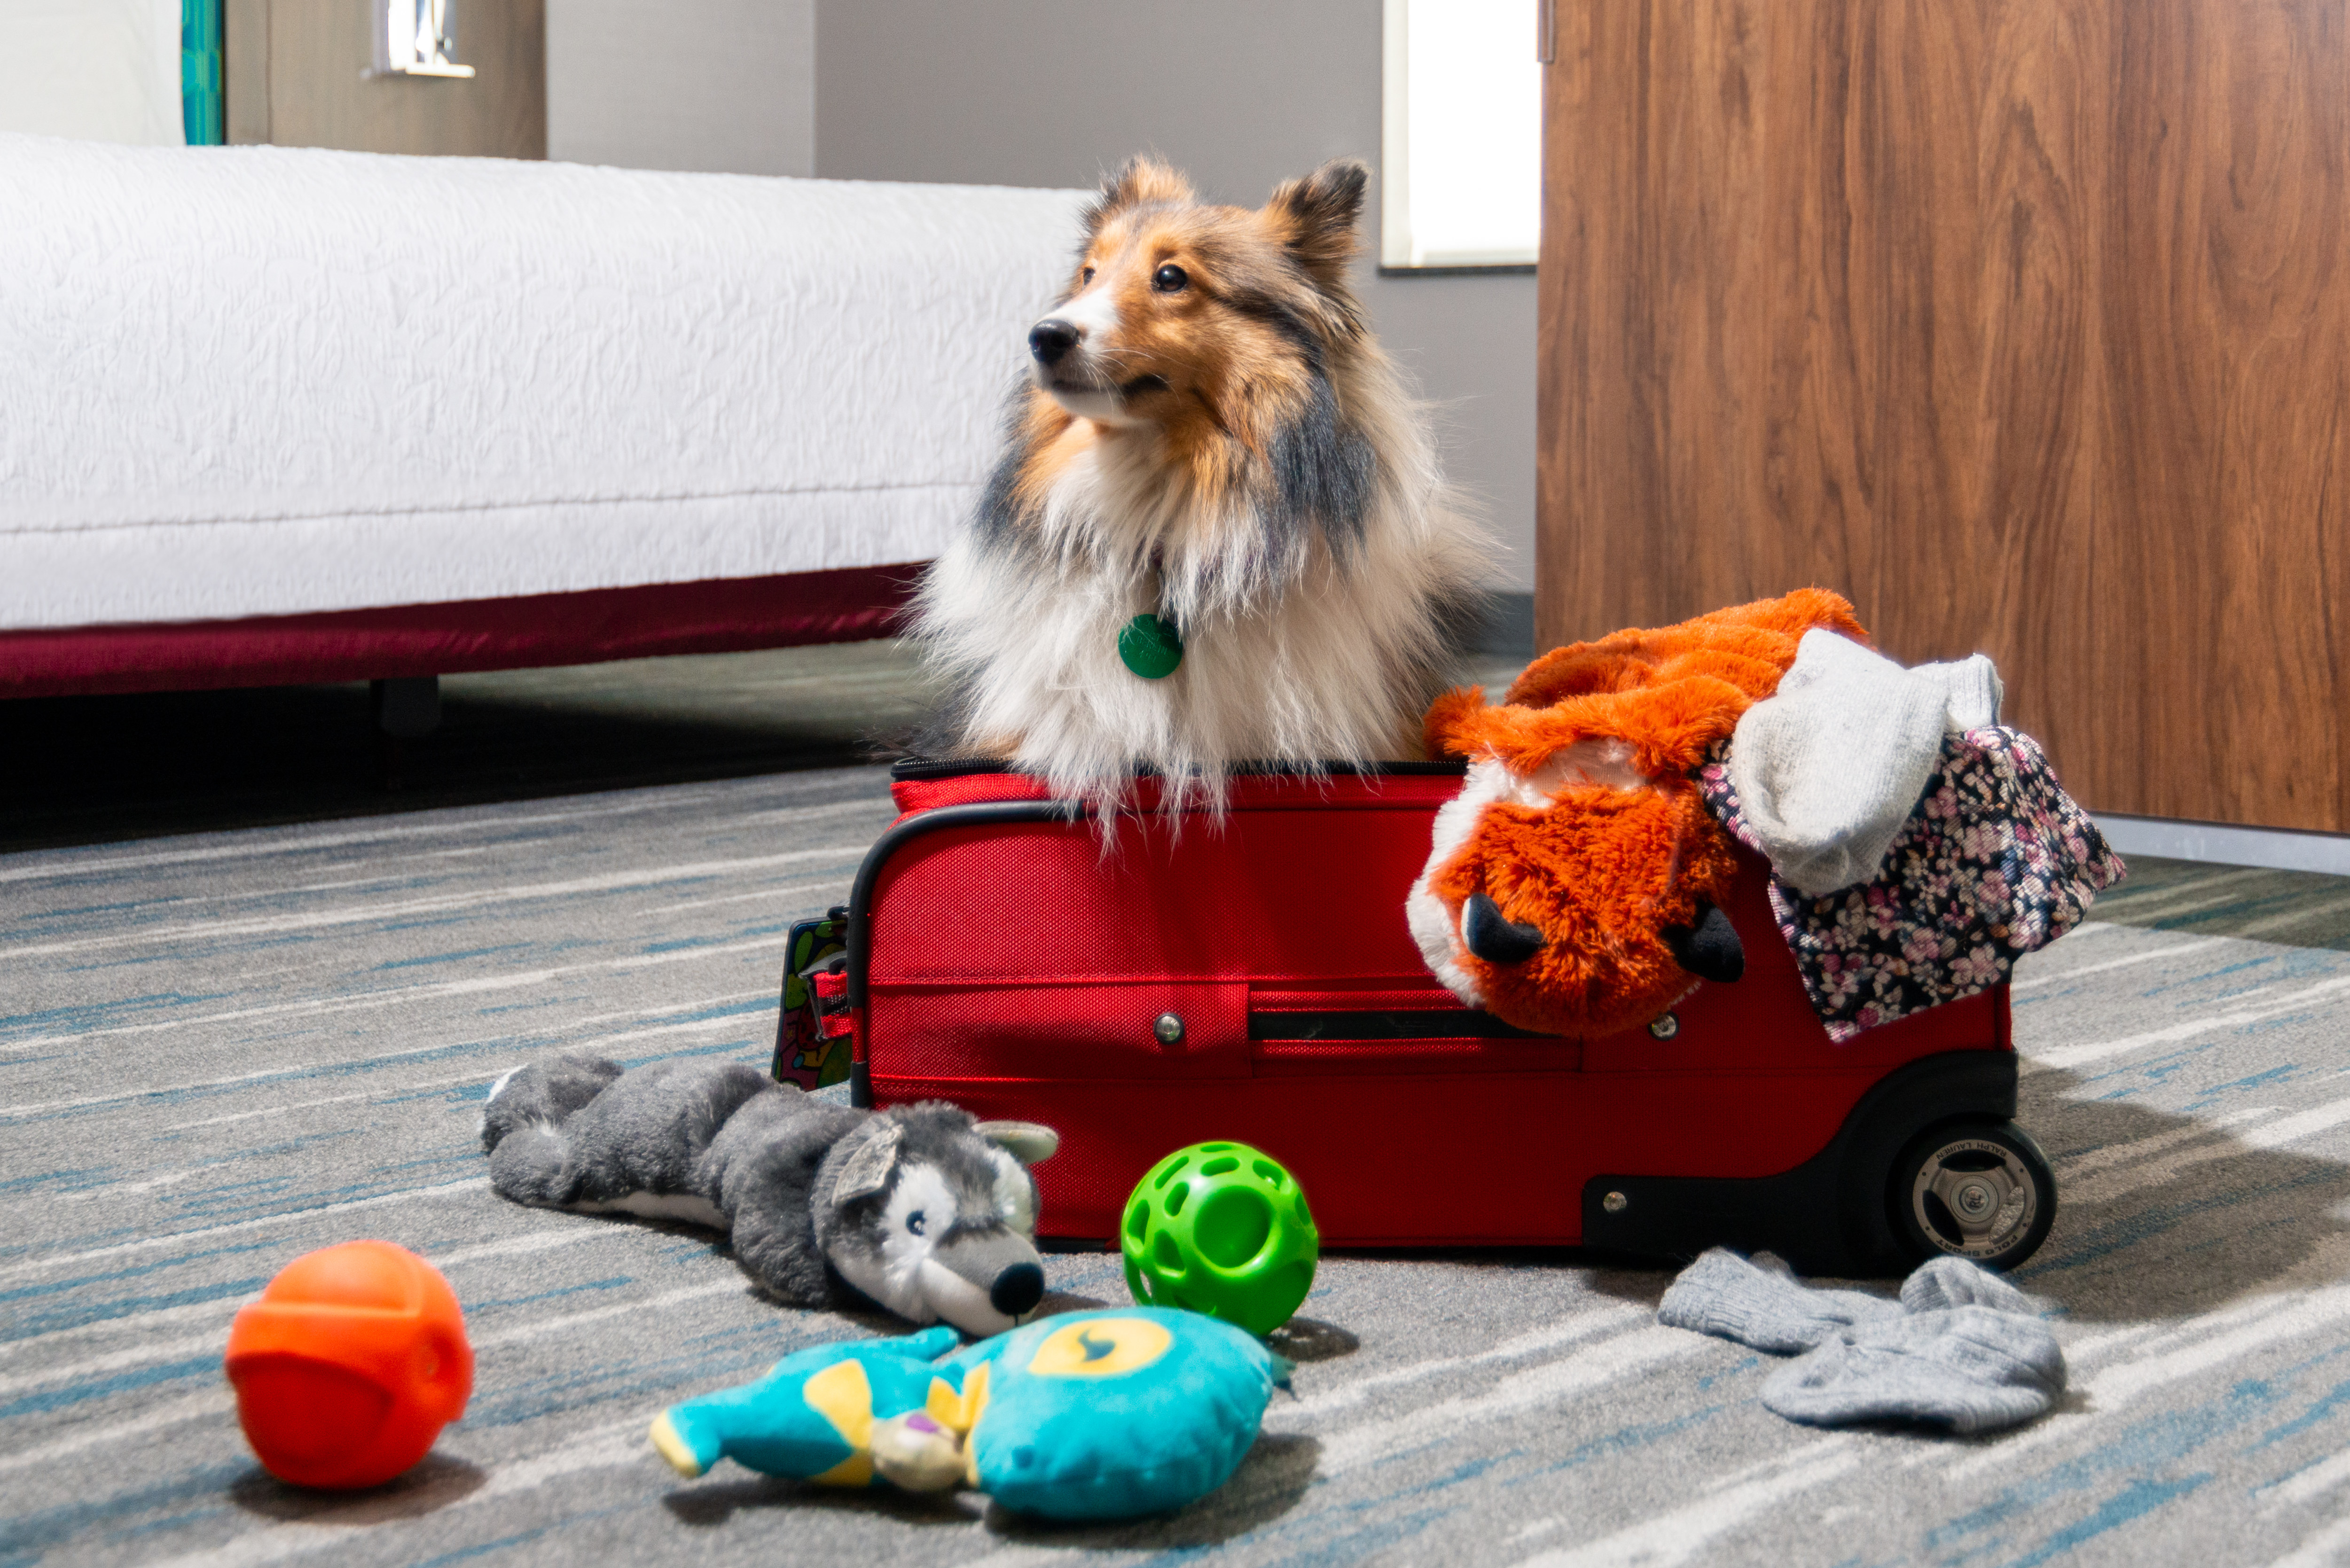 Dog with supplies and toys in a suitcase in a pet friendly guest room